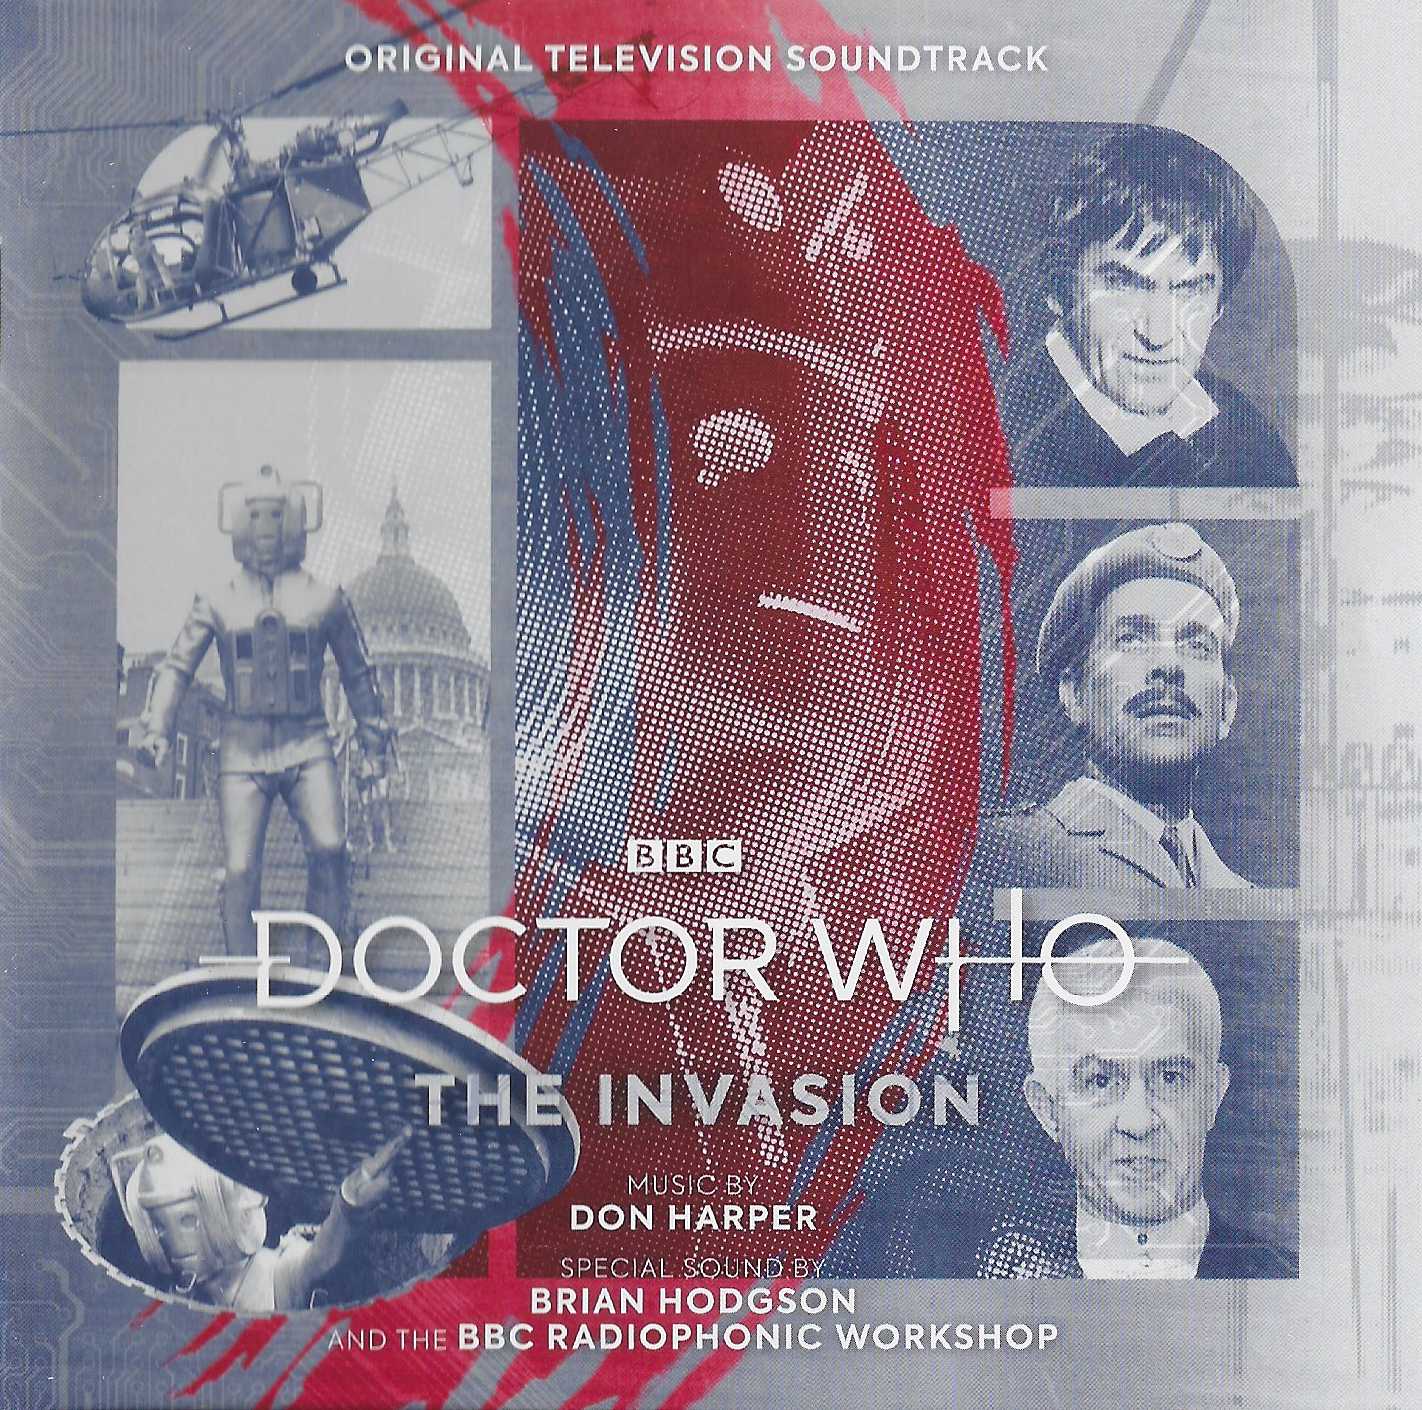 Picture of Doctor Who - The invasion by artist Don Harper from the BBC cds - Records and Tapes library